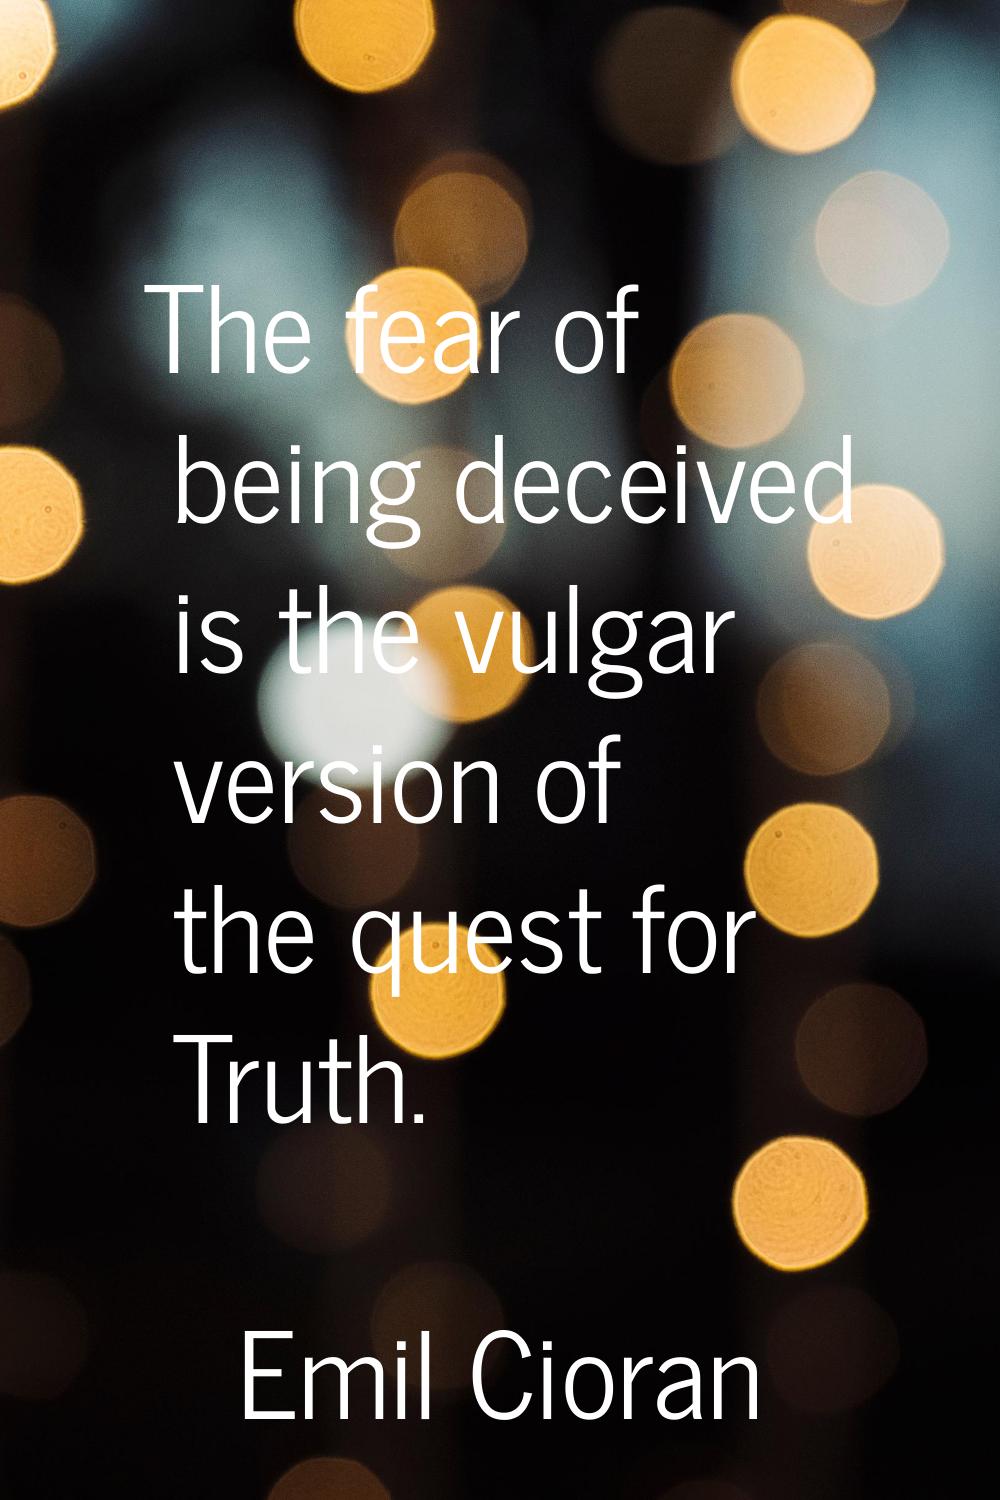 The fear of being deceived is the vulgar version of the quest for Truth.